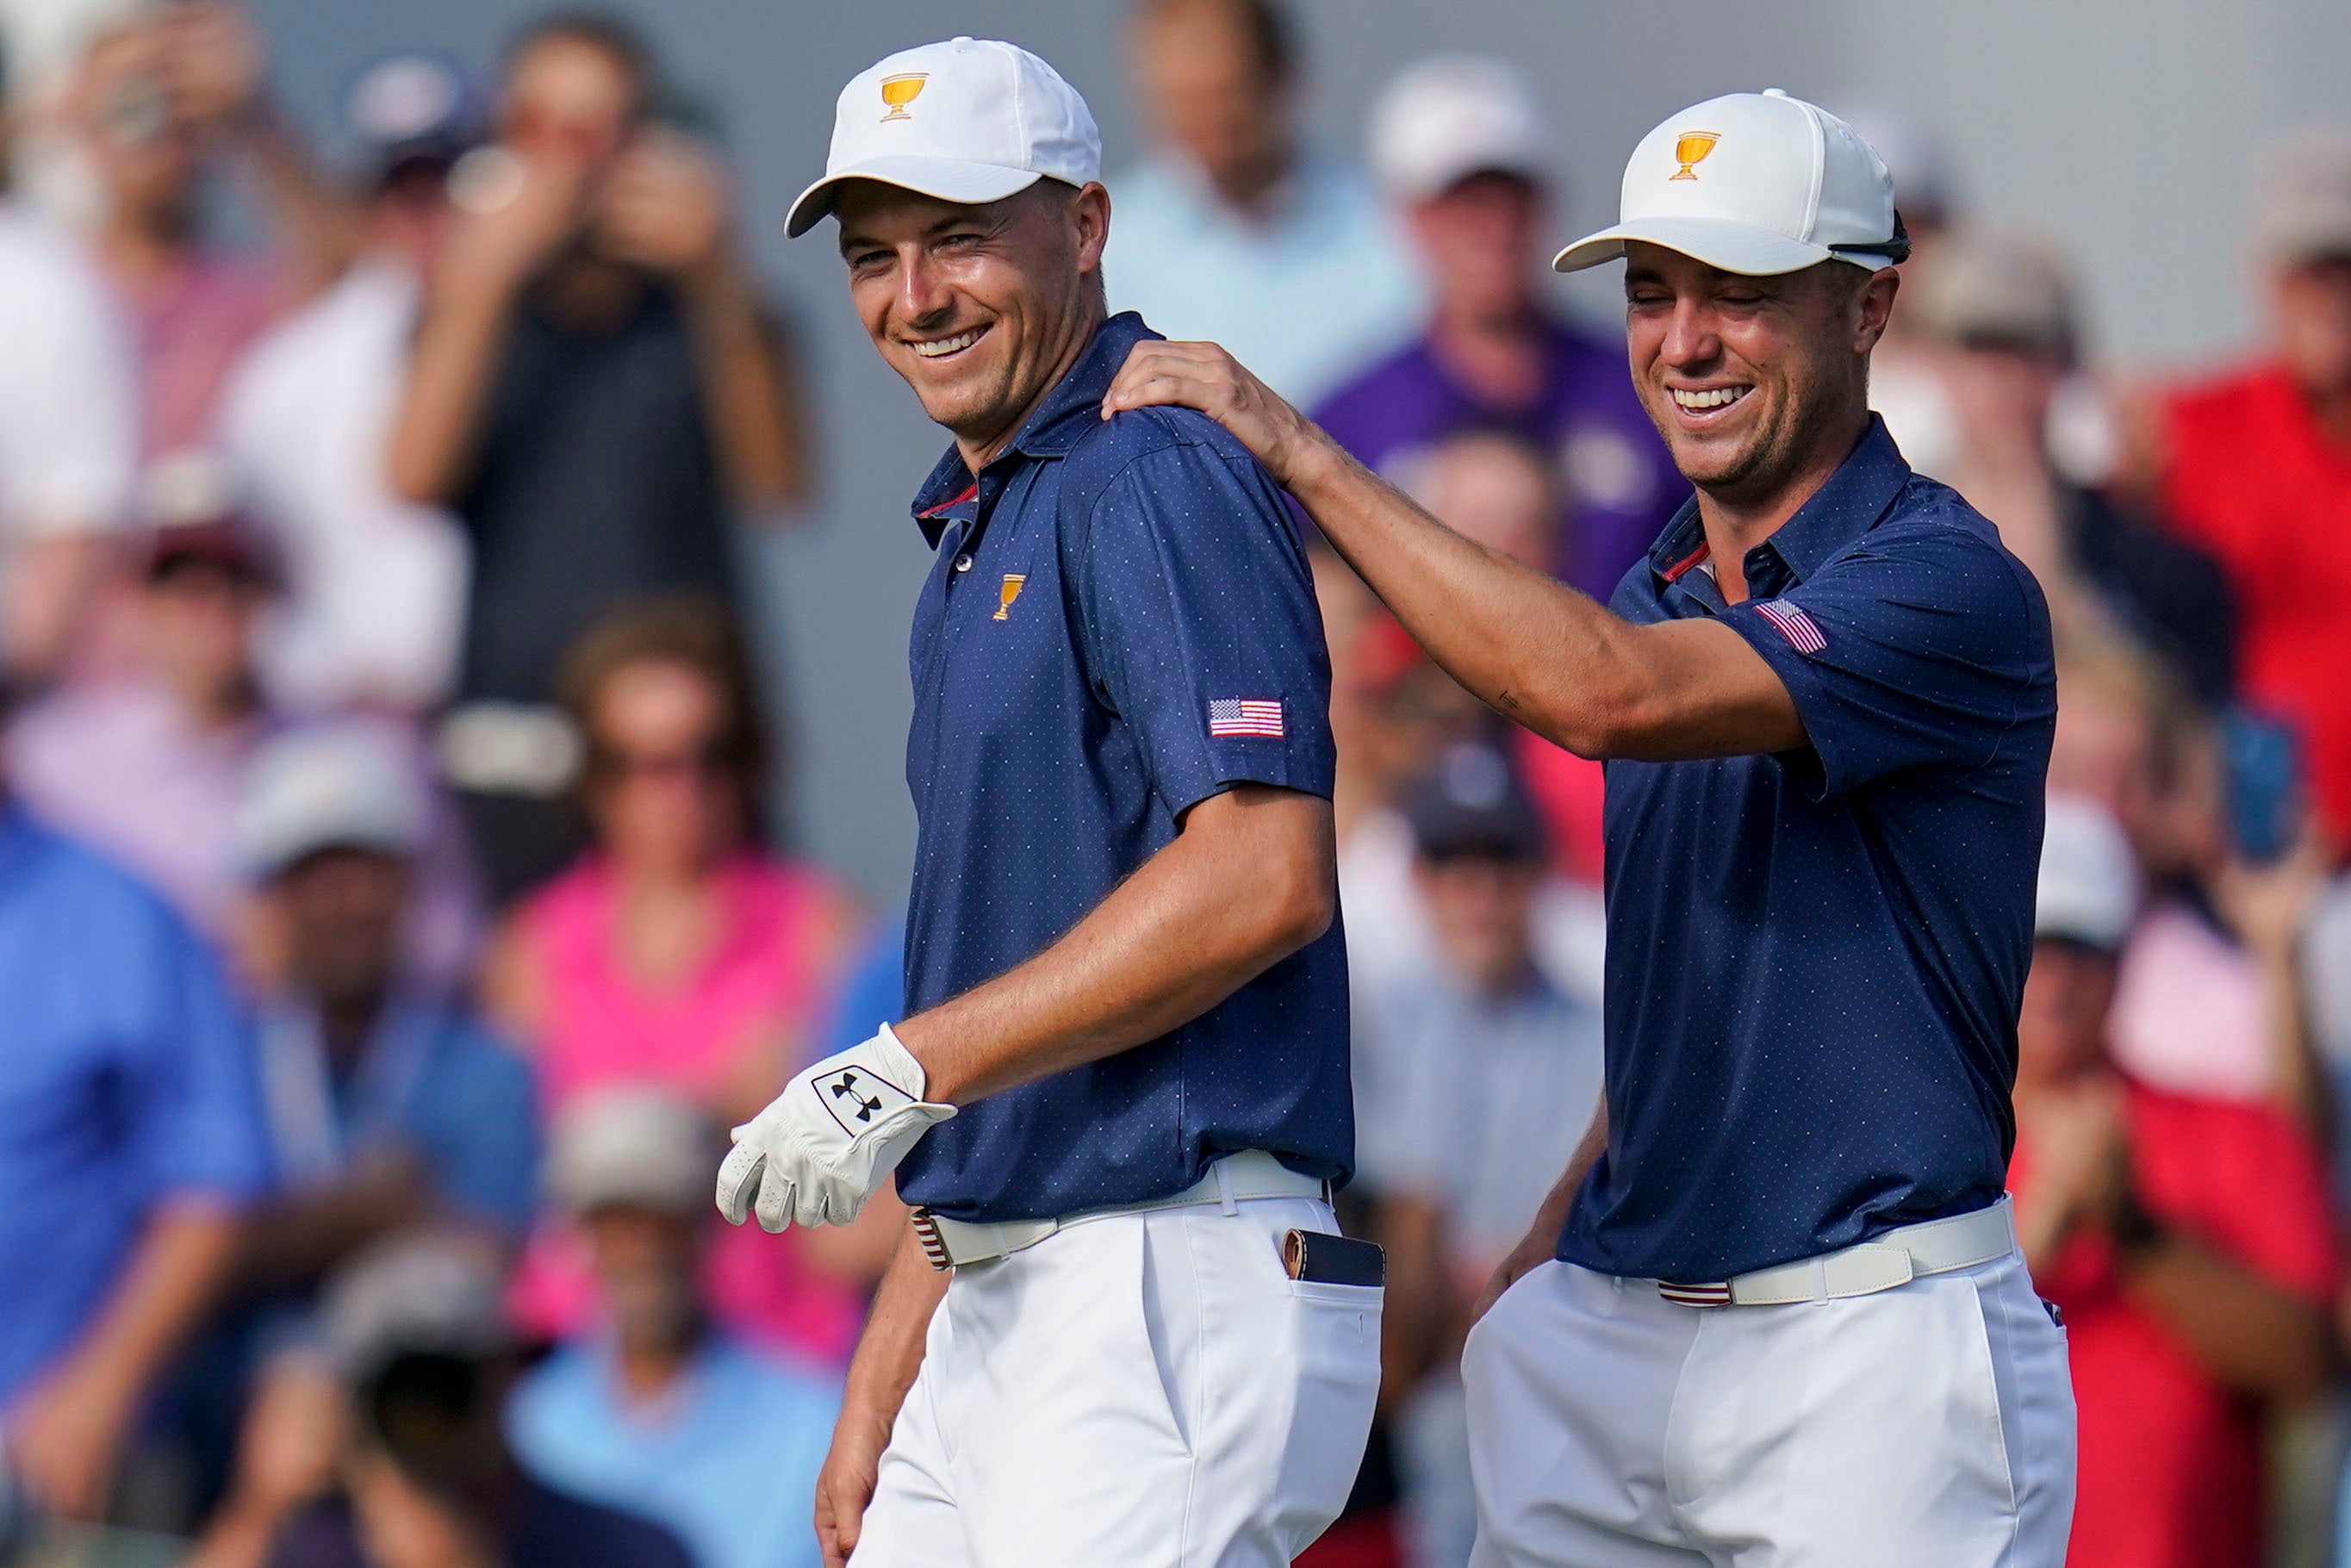 Jordan Spieth and Justin Thomas are close friends and a well-established team